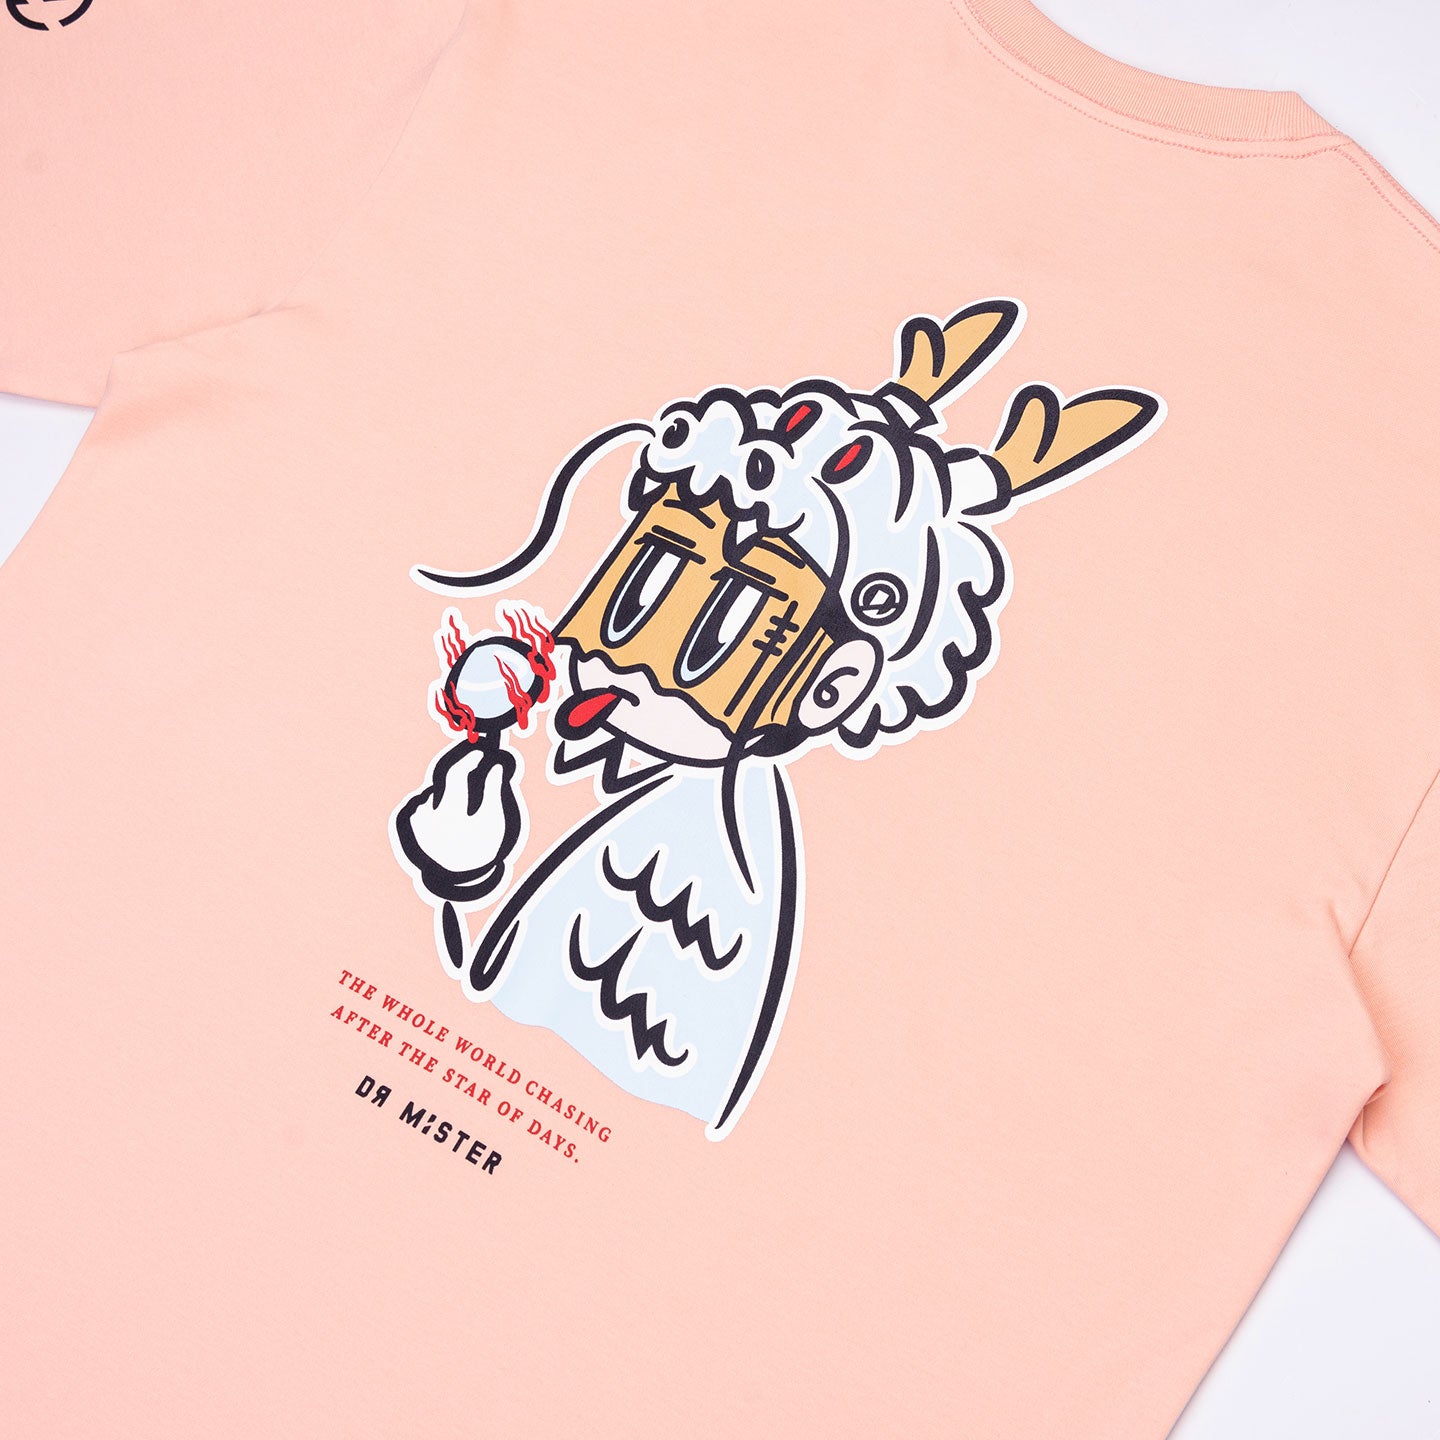 Tyge Dragon Oversized Tee - Salmon Pink (Special Edition)